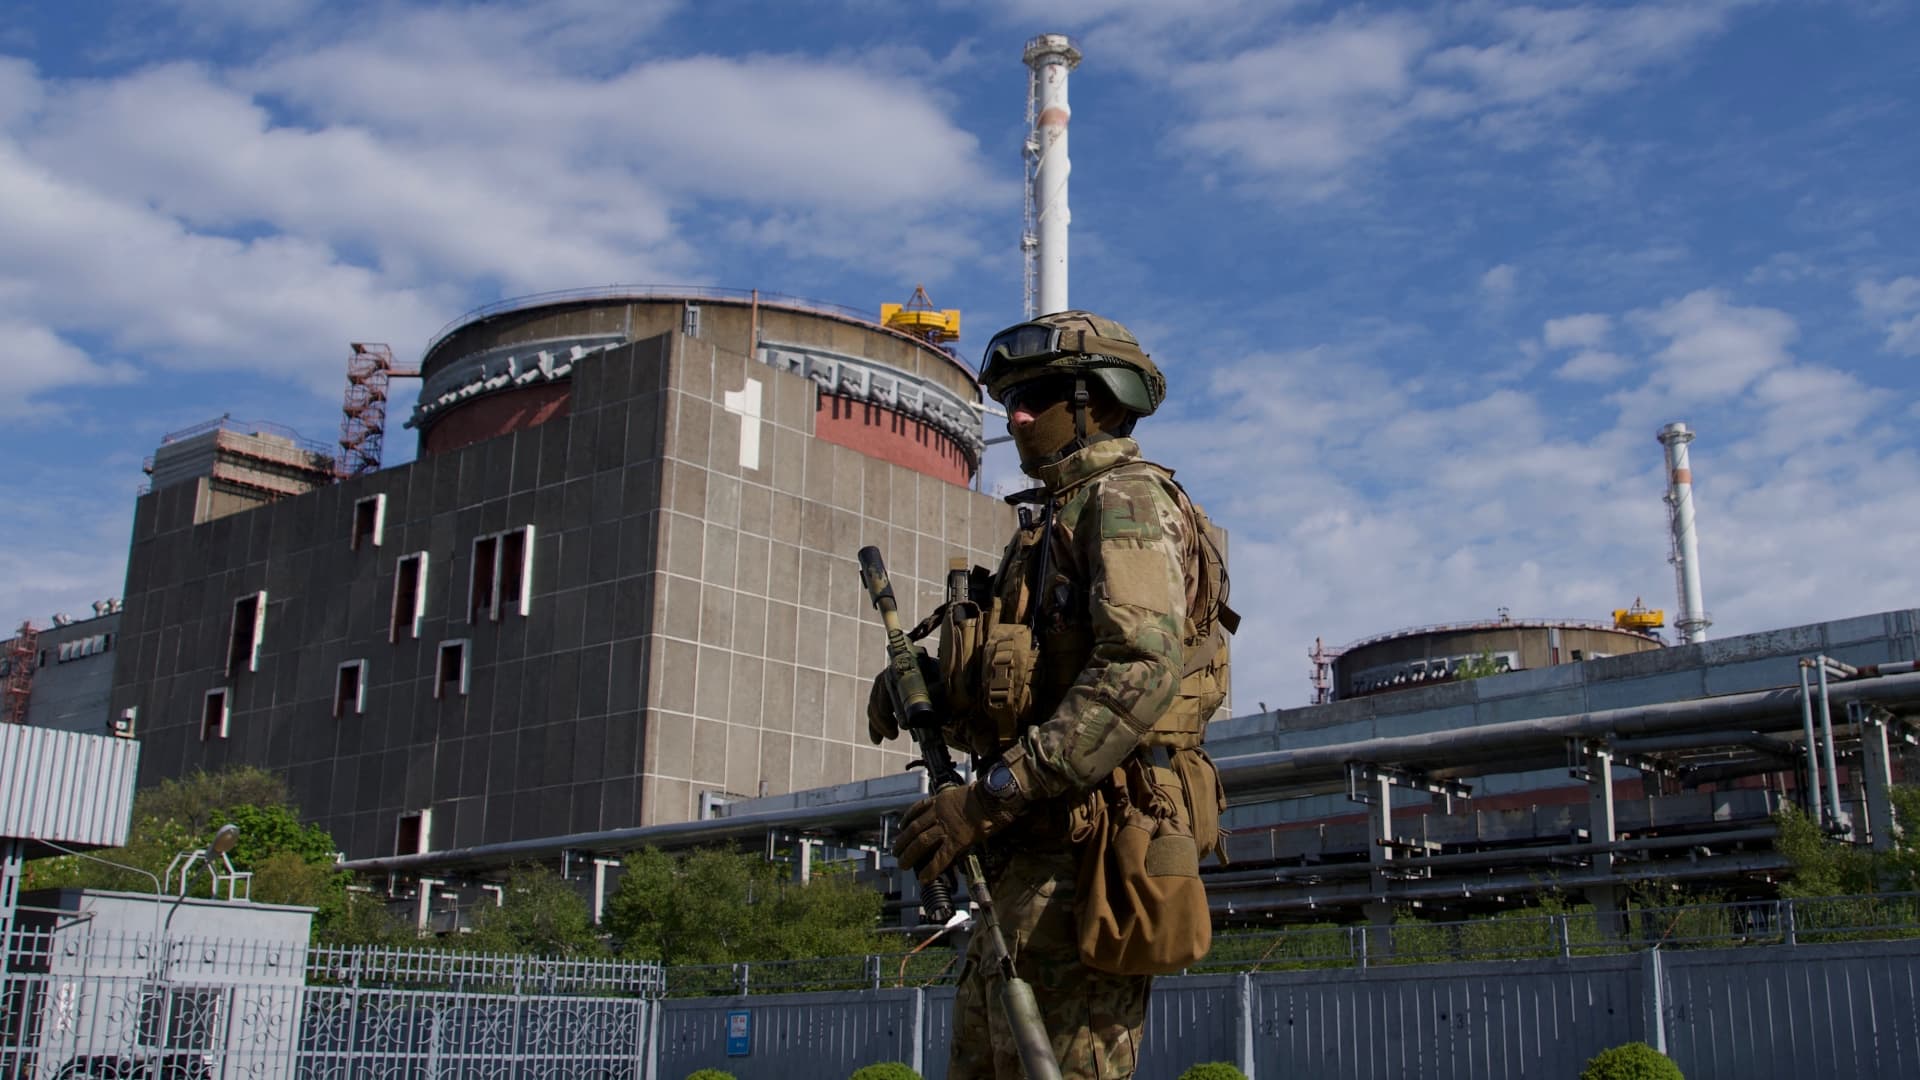 A Russian serviceman patrols the territory of the Zaporizhzhia Nuclear Power Station in Energodar on May 1, 2022. The Zaporizhzhia Nuclear Power Station, seized by Russian forces in March, is in southeastern Ukraine and is the largest nuclear power plant in Europe and among the 10 largest in the world. This picture was taken during a media trip organised by the Russian army.